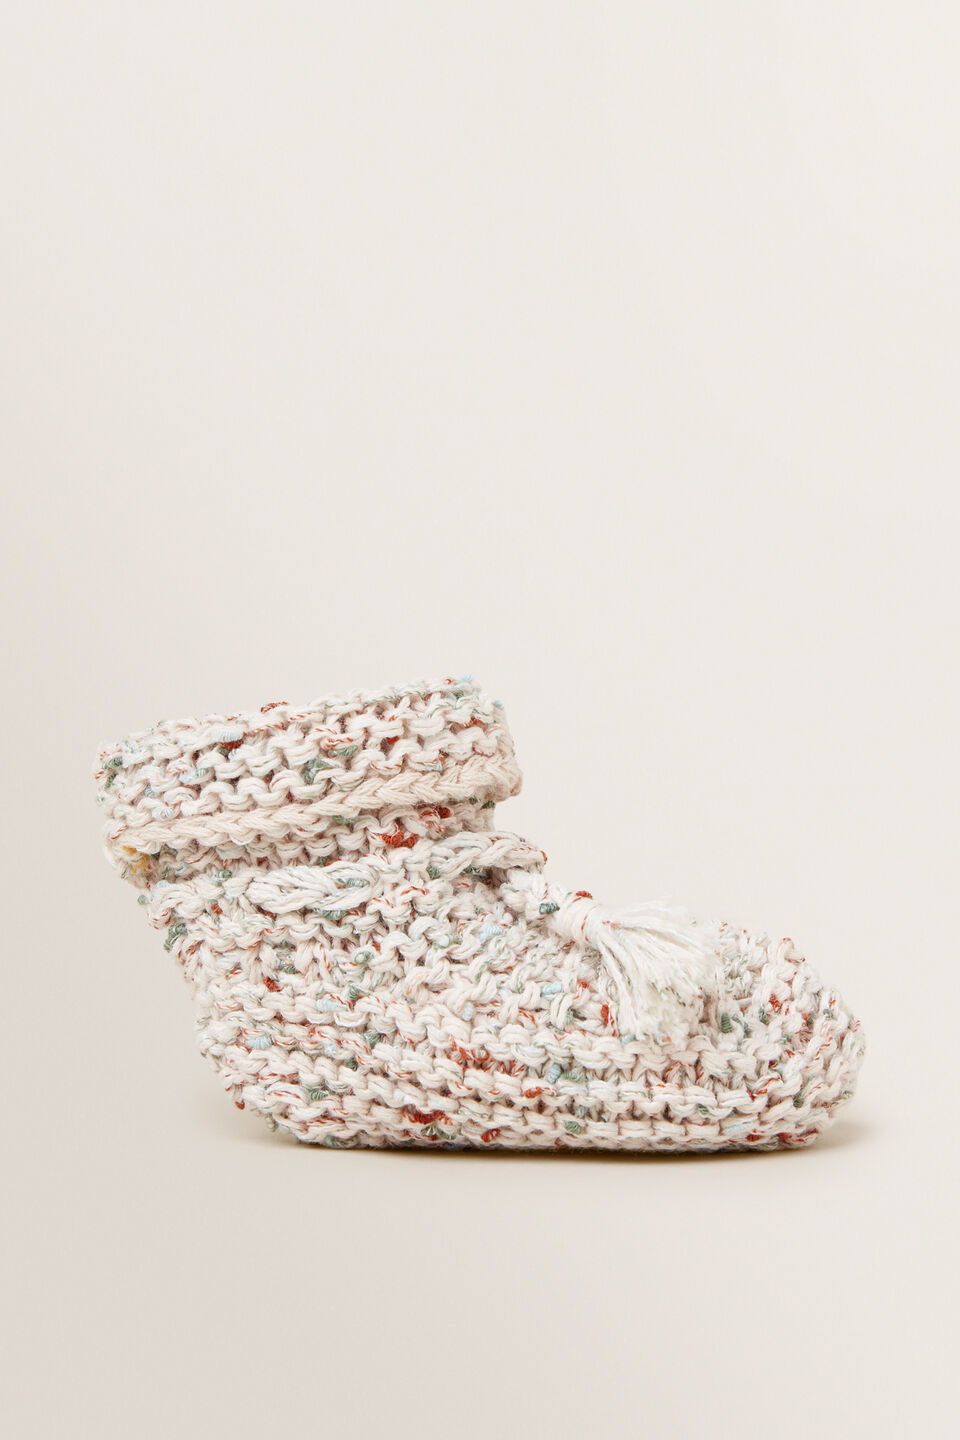 Knit Speckle Booties  